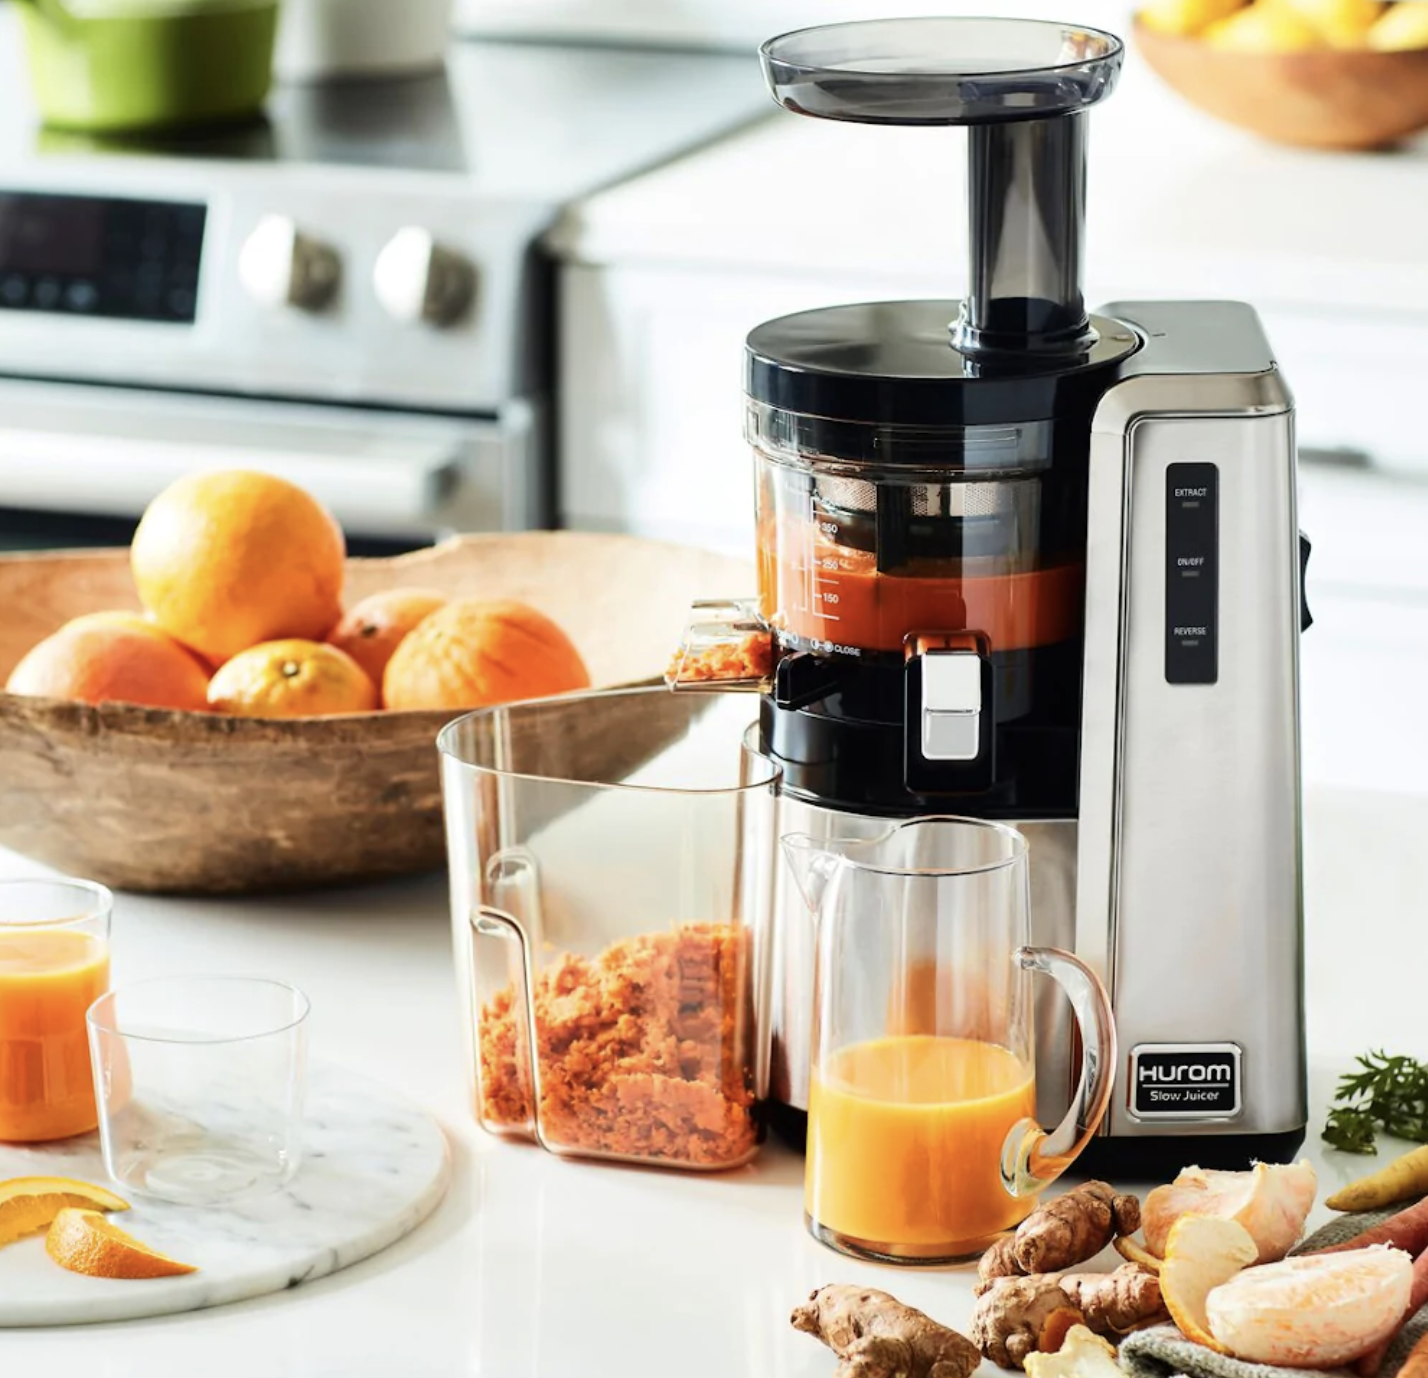 Refresh your morning routine with Hurom juicers on sale for up to 35% off